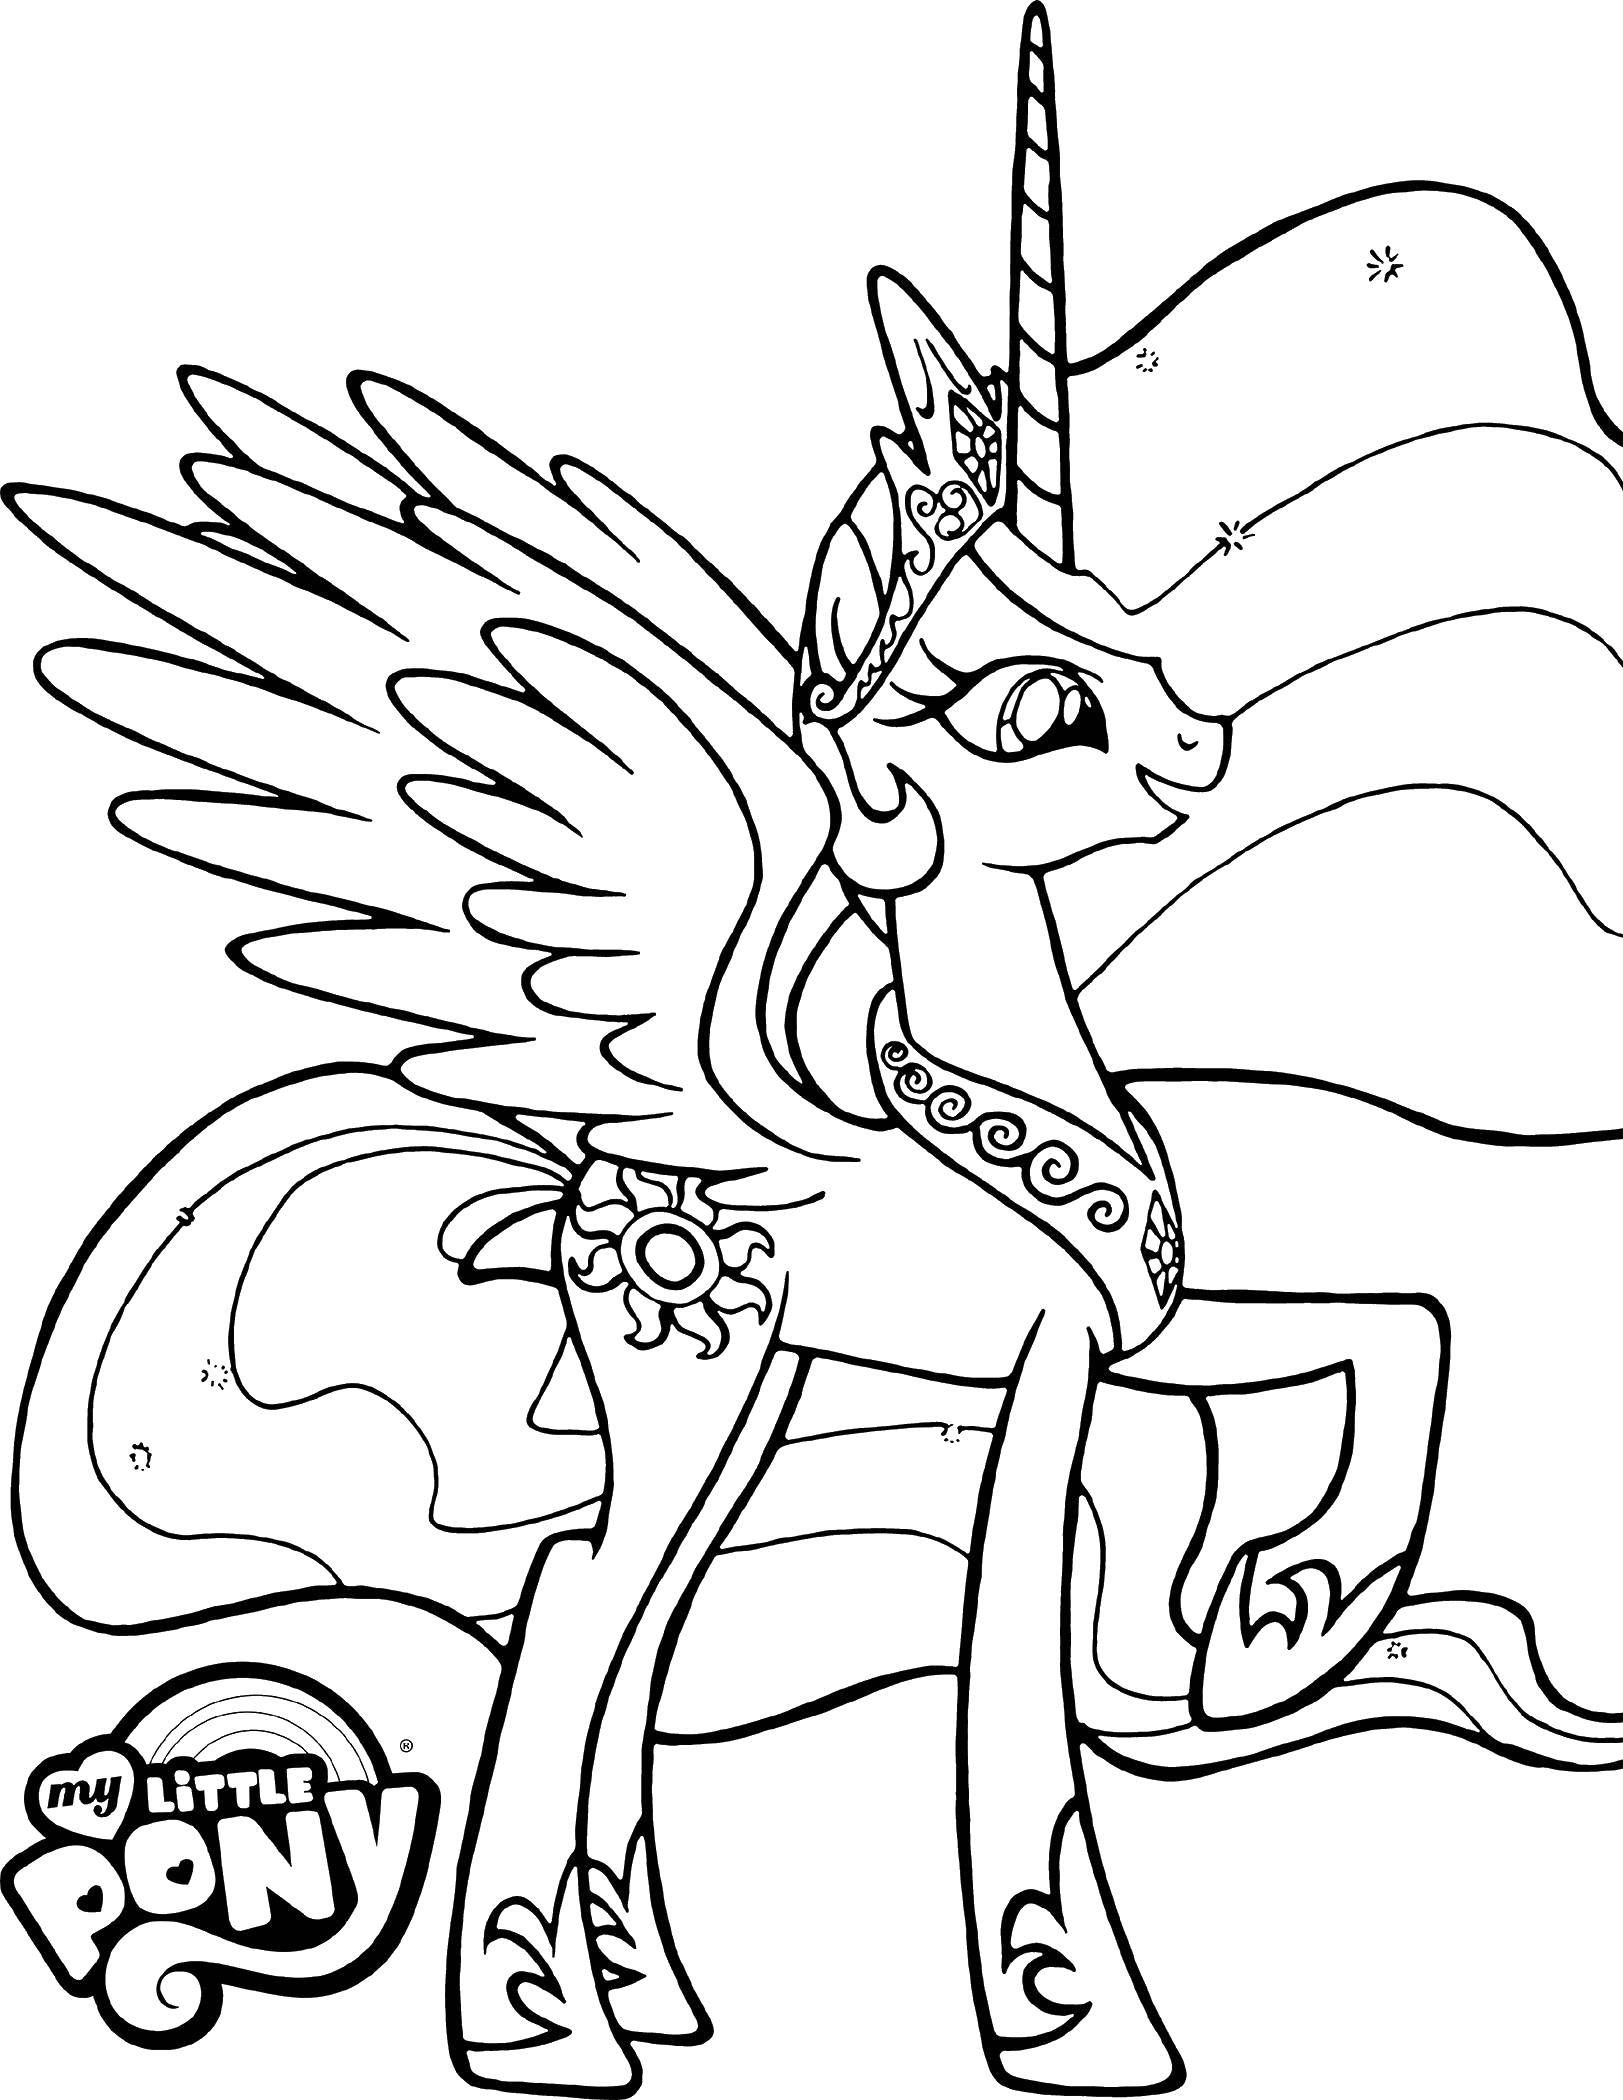 Coloring Graceful pony. Category Ponies. Tags:  Pony, My little pony.